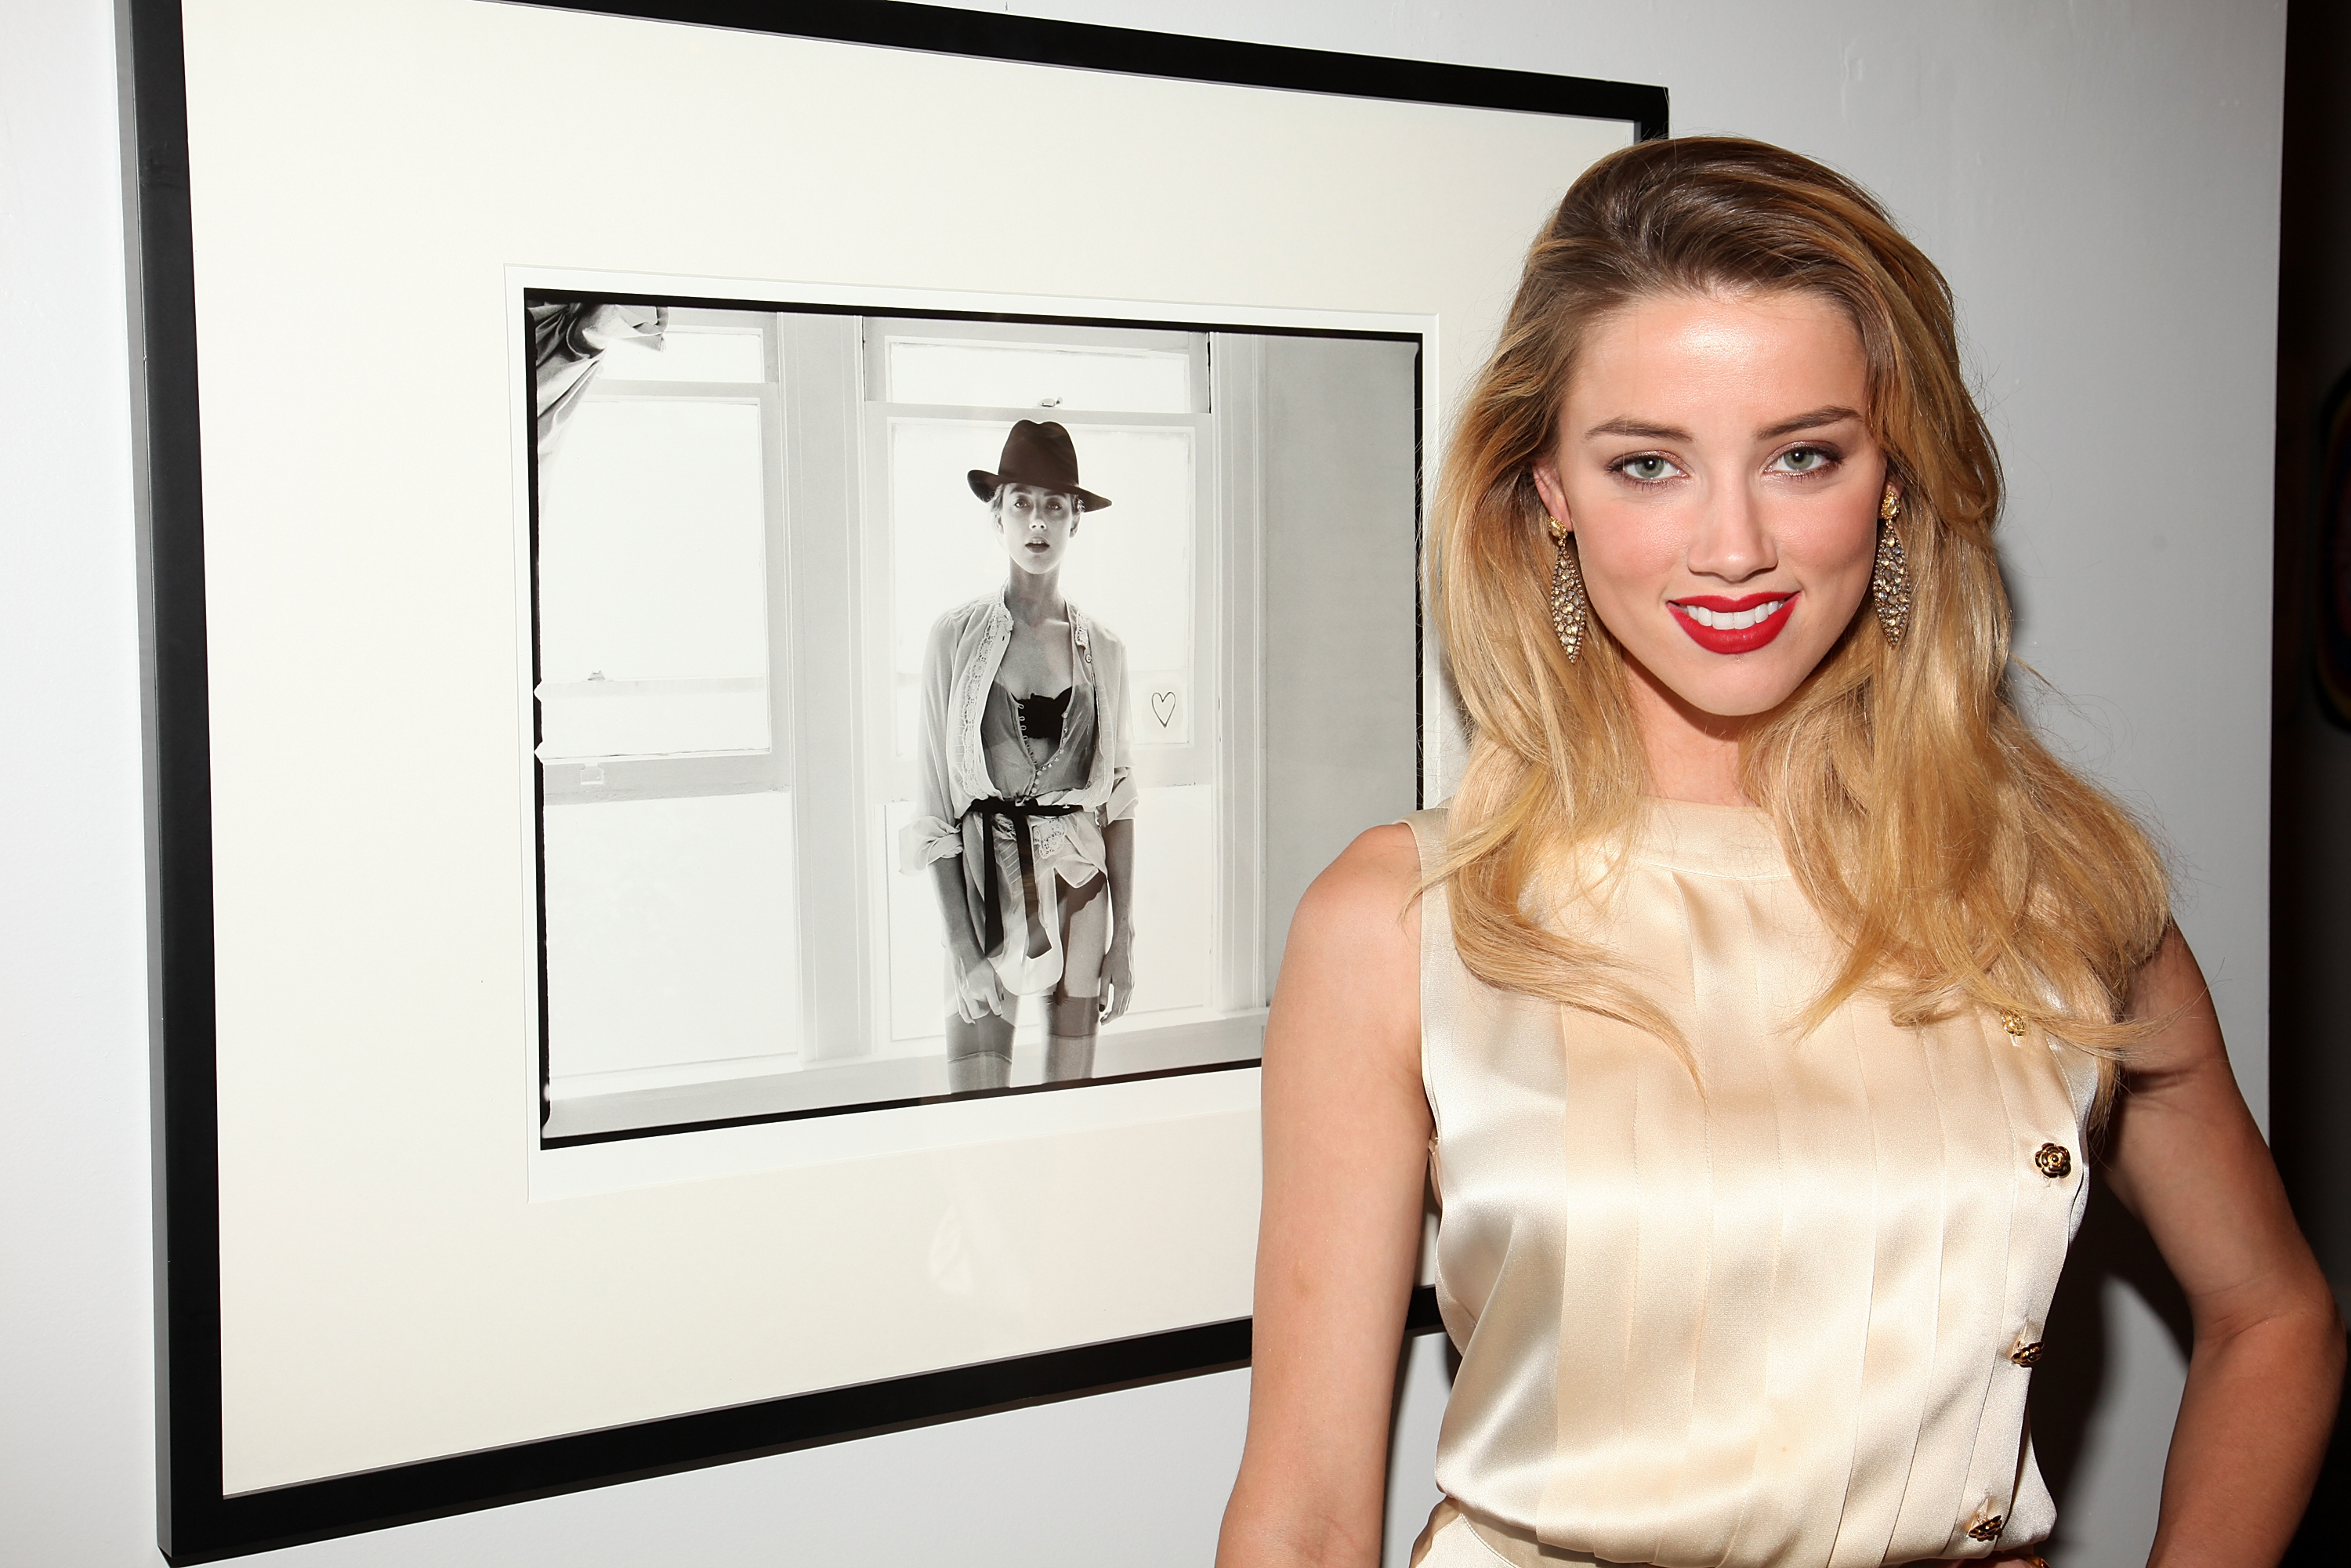 Amber Lesbian Sex - Amber Heard is Gay: Everything You Need to Know About the Openly Bisexual  Actress | Autostraddle